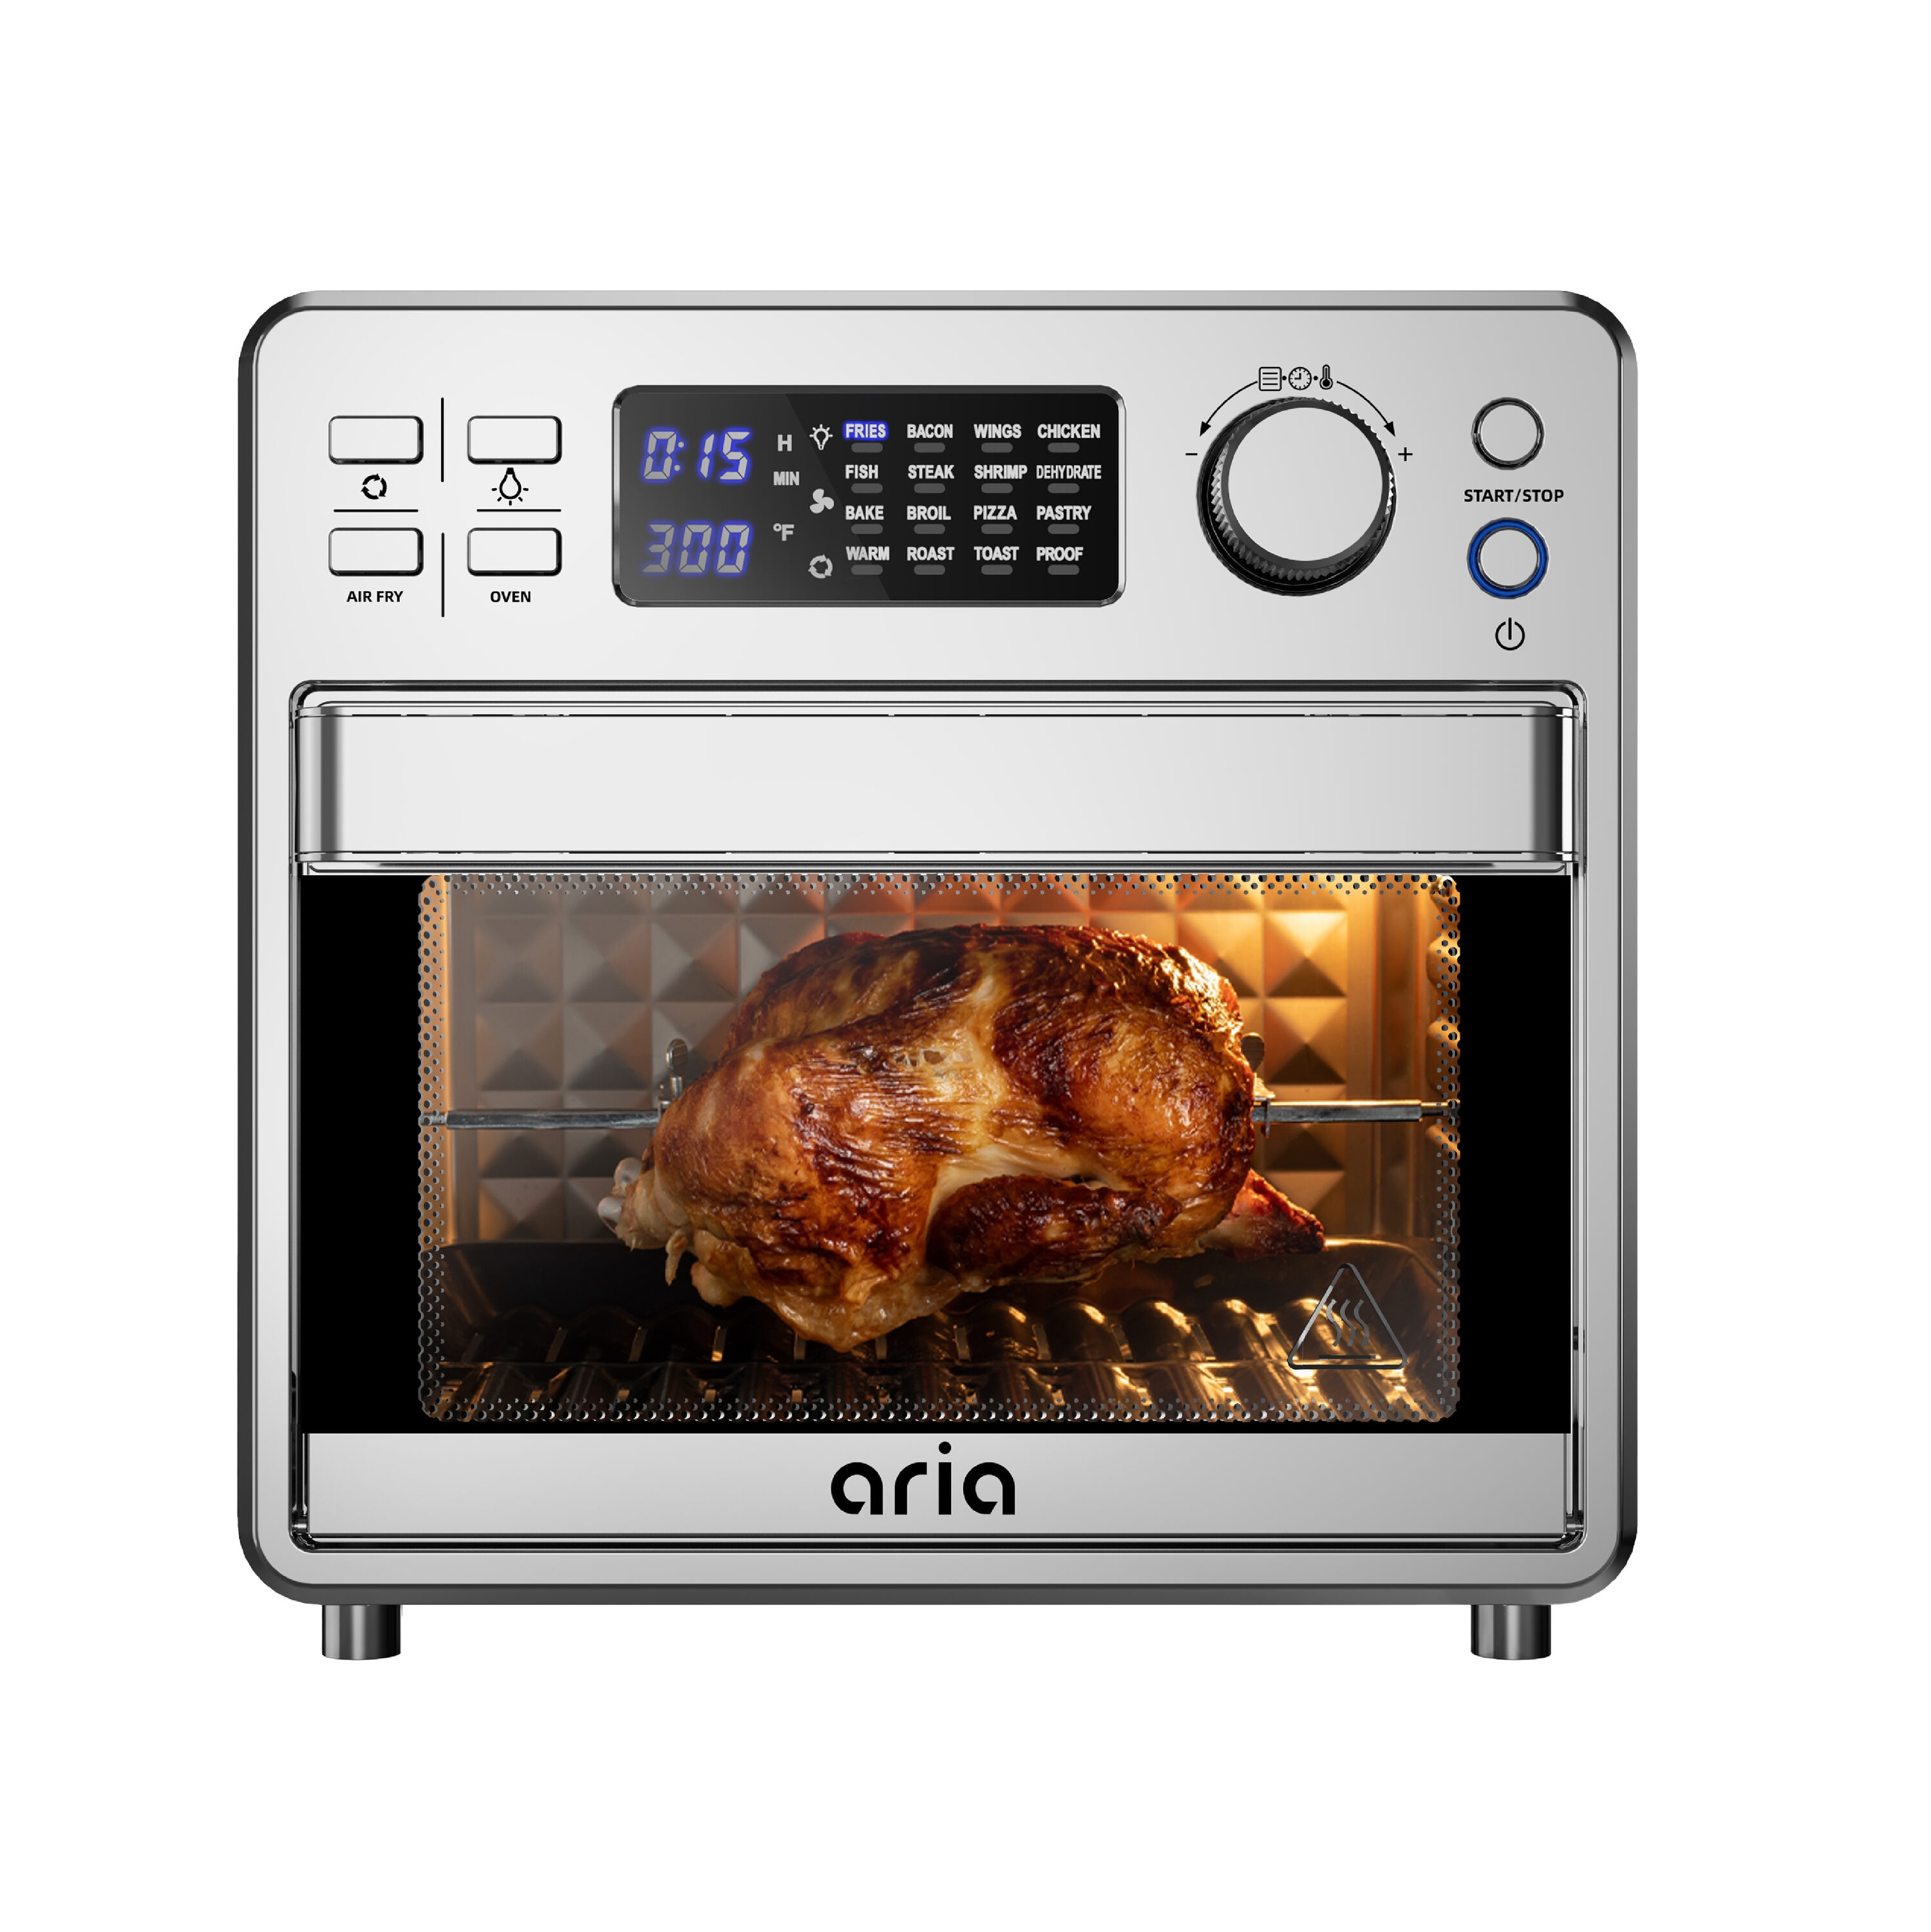 OSTBA Air Fryer Oven 26 Quart 10-in-1 Review 